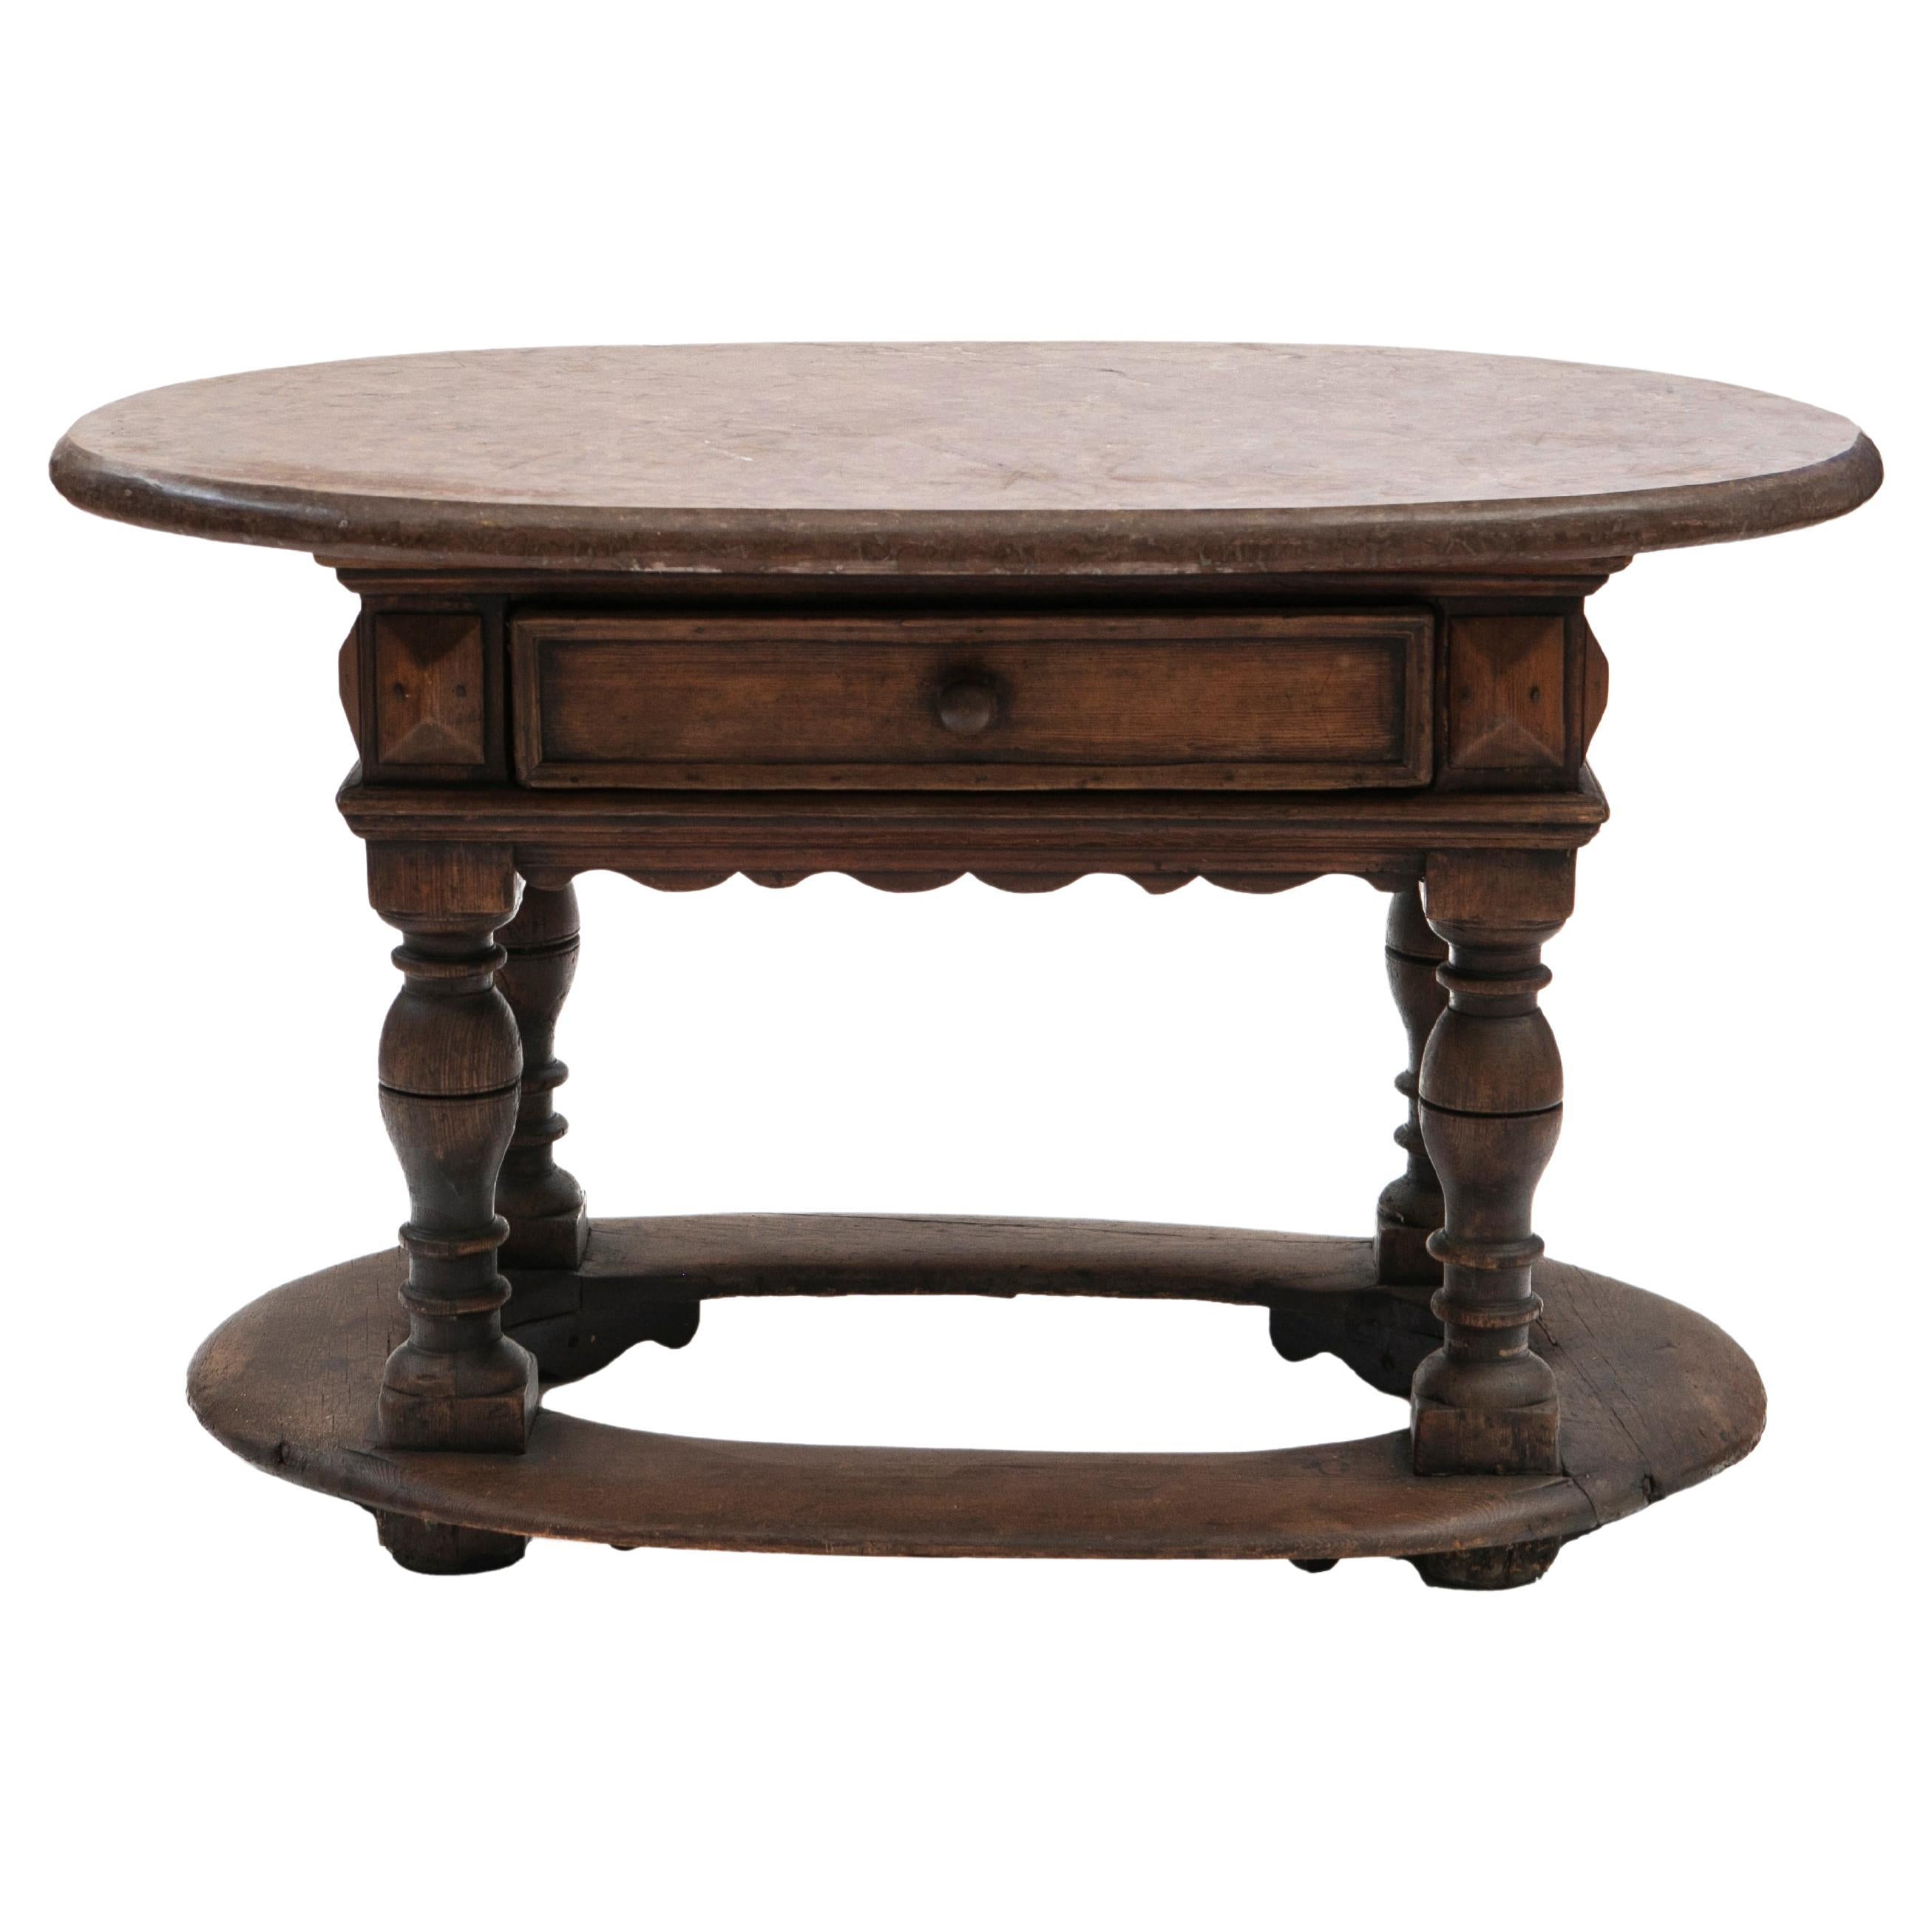 Antique Swedish Baroque Table with Fossil Limestone Top